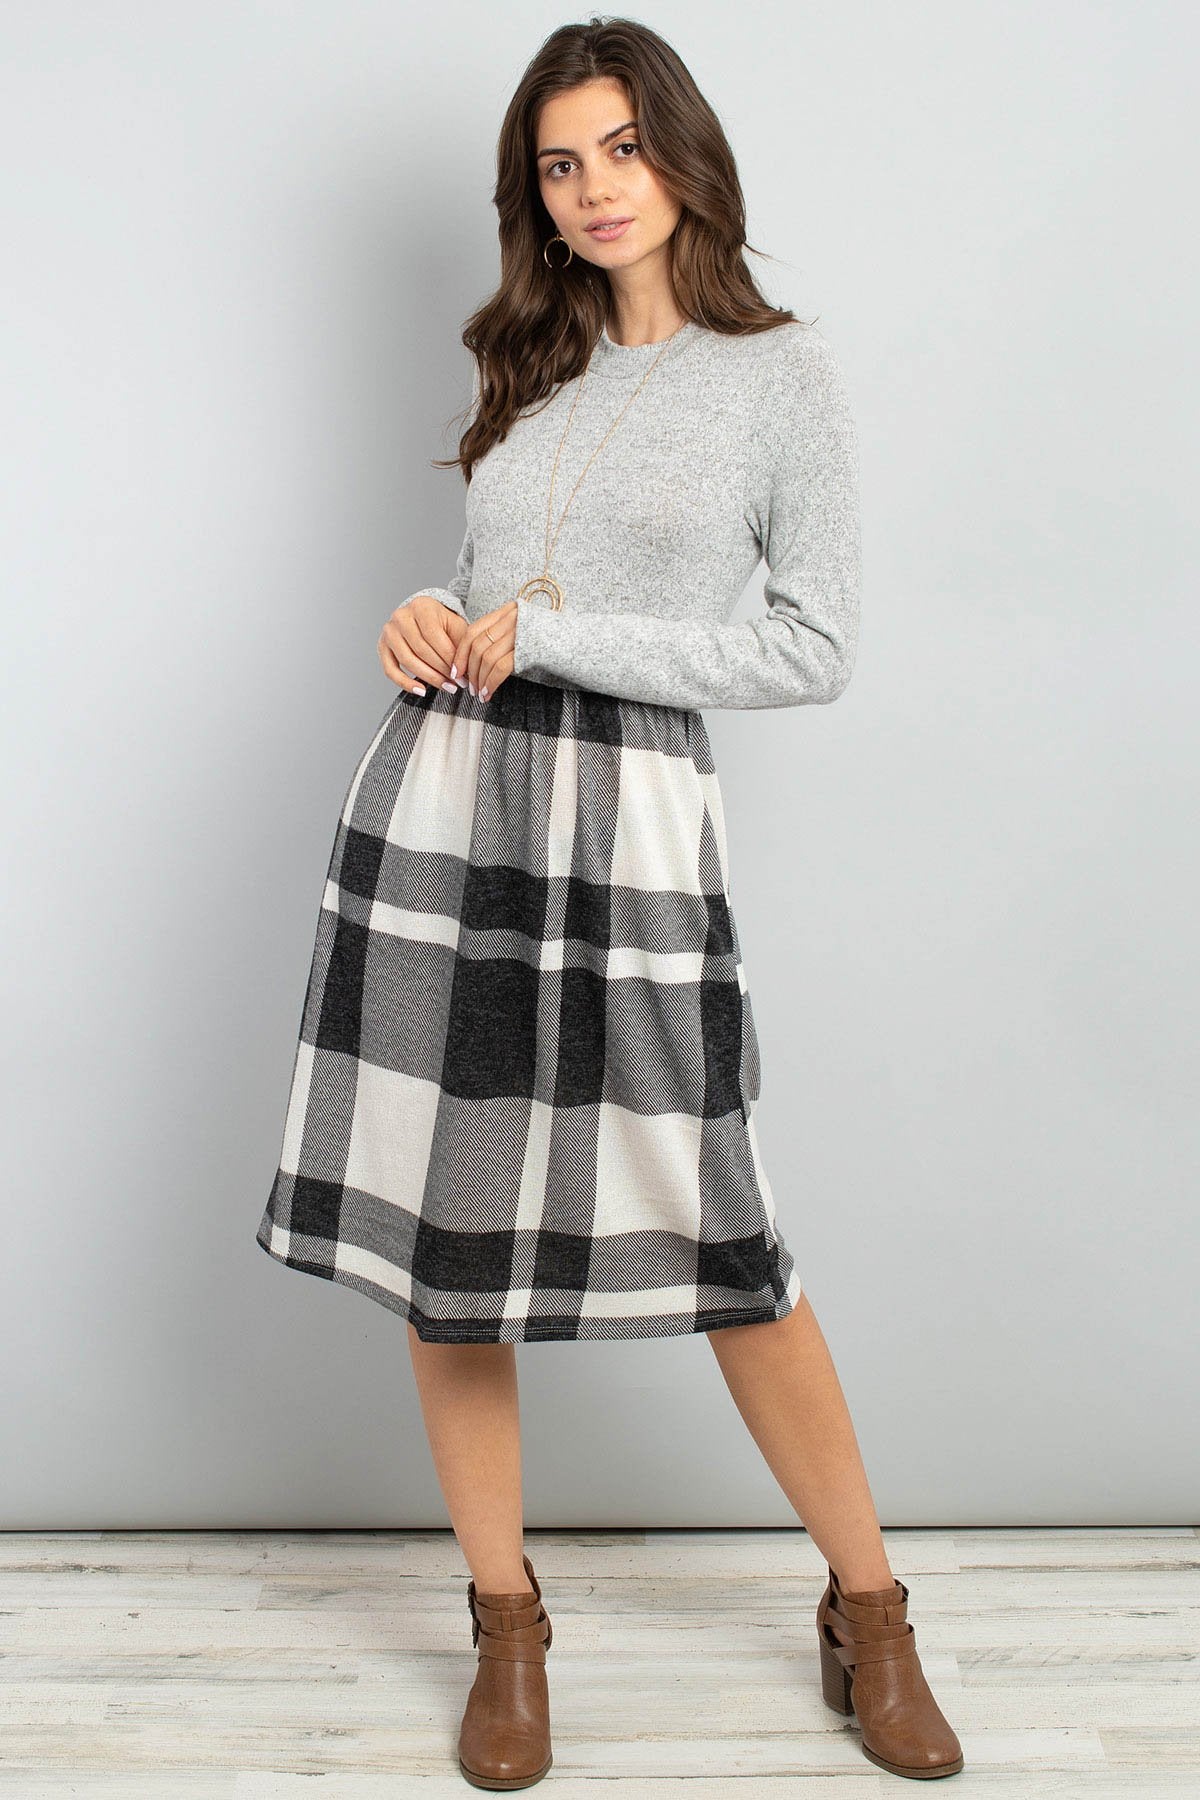 Shop Two Toned High Neck Long Sleeves Plaid Contrast Dress, dresses, USA Boutique